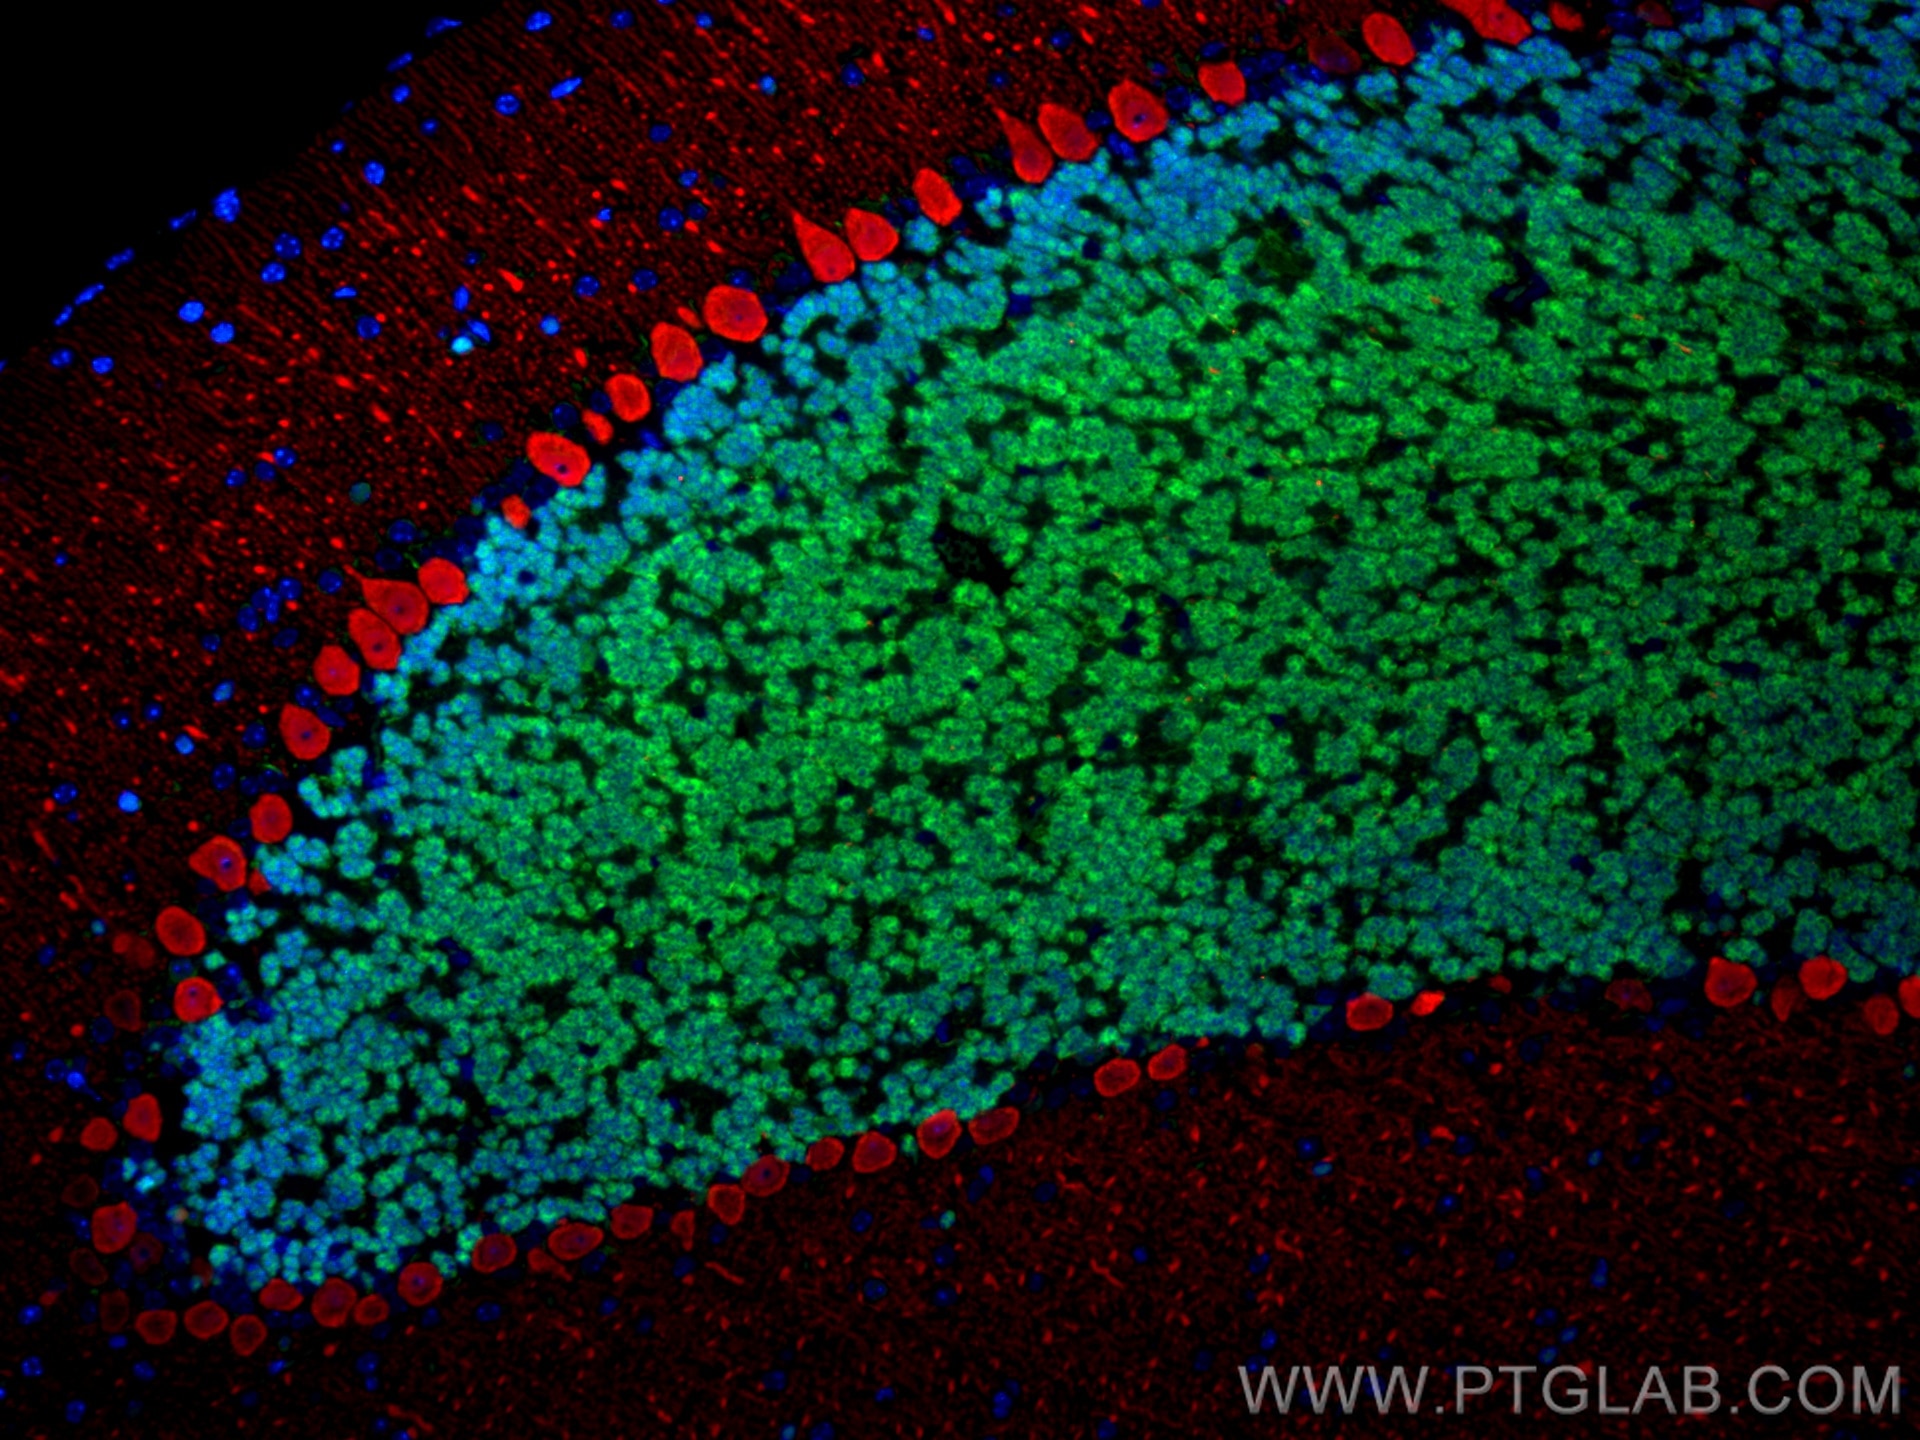 Immunofluorescence (IF) analysis of mouse cerebellum FFPE tissue stained with rabbit anti-NeuN polyclonal antibody (26975-1-AP, green) and mouse anti-Calbindin-D28k monoclonal antibody (66394-1-Ig, red). Multi-rAb CoraLite® Plus 488-Goat Anti-Rabbit Recombinant Secondary Antibody (H+L) (RGAM002, 1:500) and Multi-rAb CoraLite® Plus 594-Goat Anti-Mouse Recombinant Secondary Antibody (H+L) (RGAM004, 1:500) were used for detection.  